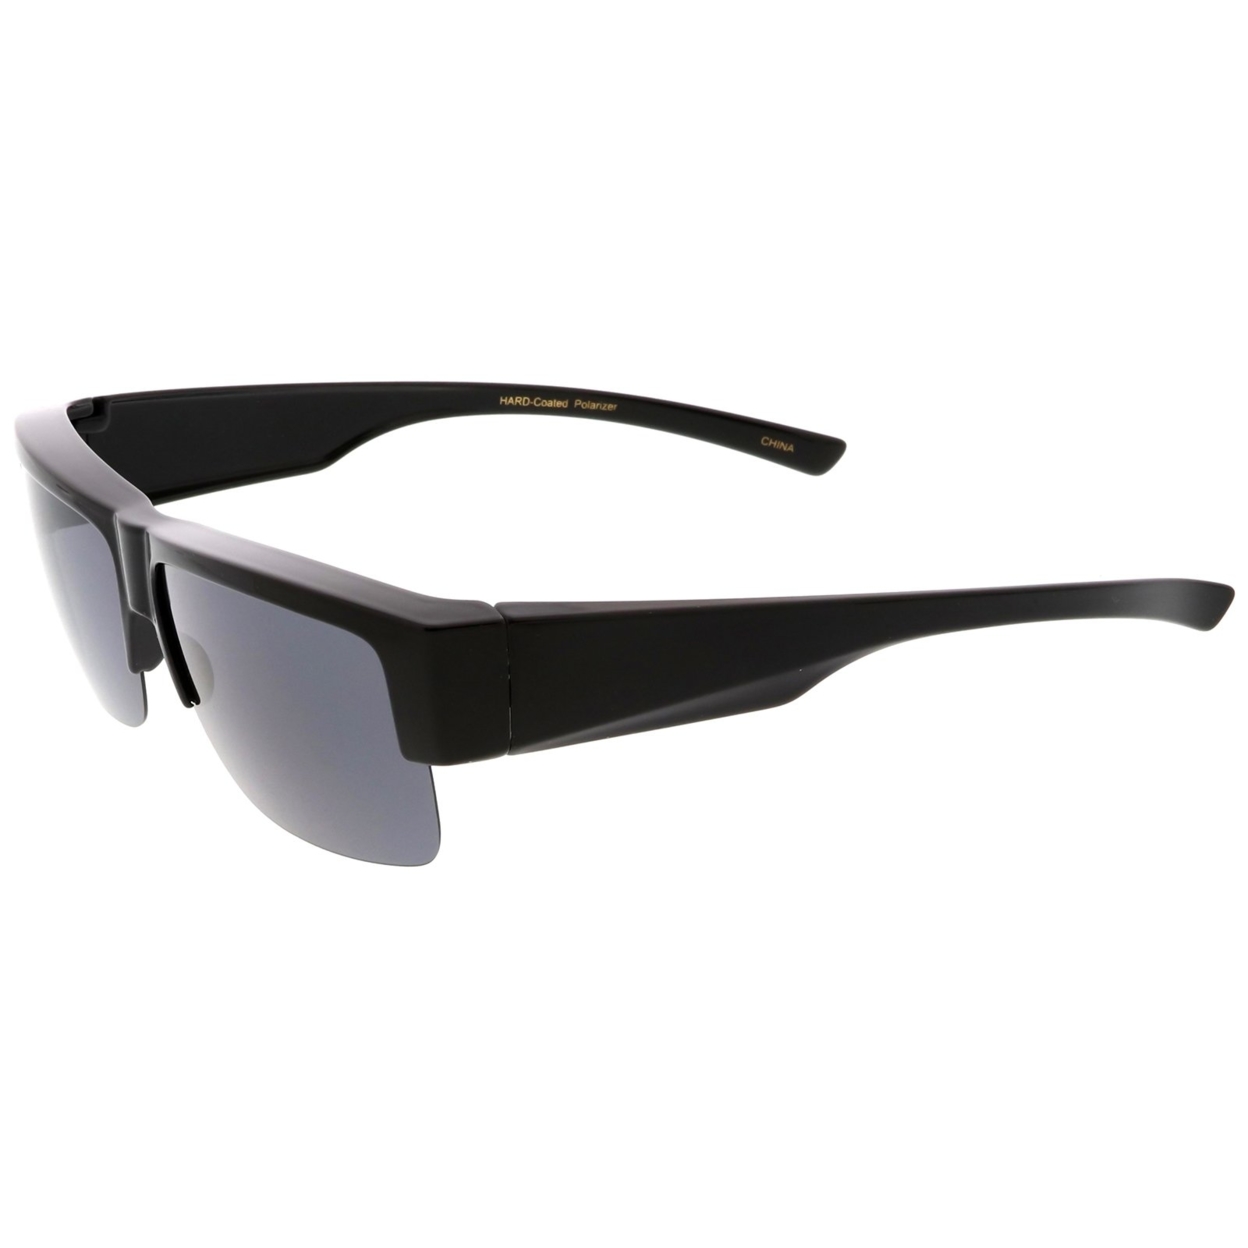 Large Semi Rimless Rectangle Sunglasses With Polarized Lens Wide Arms 65mm - Black / Smoke